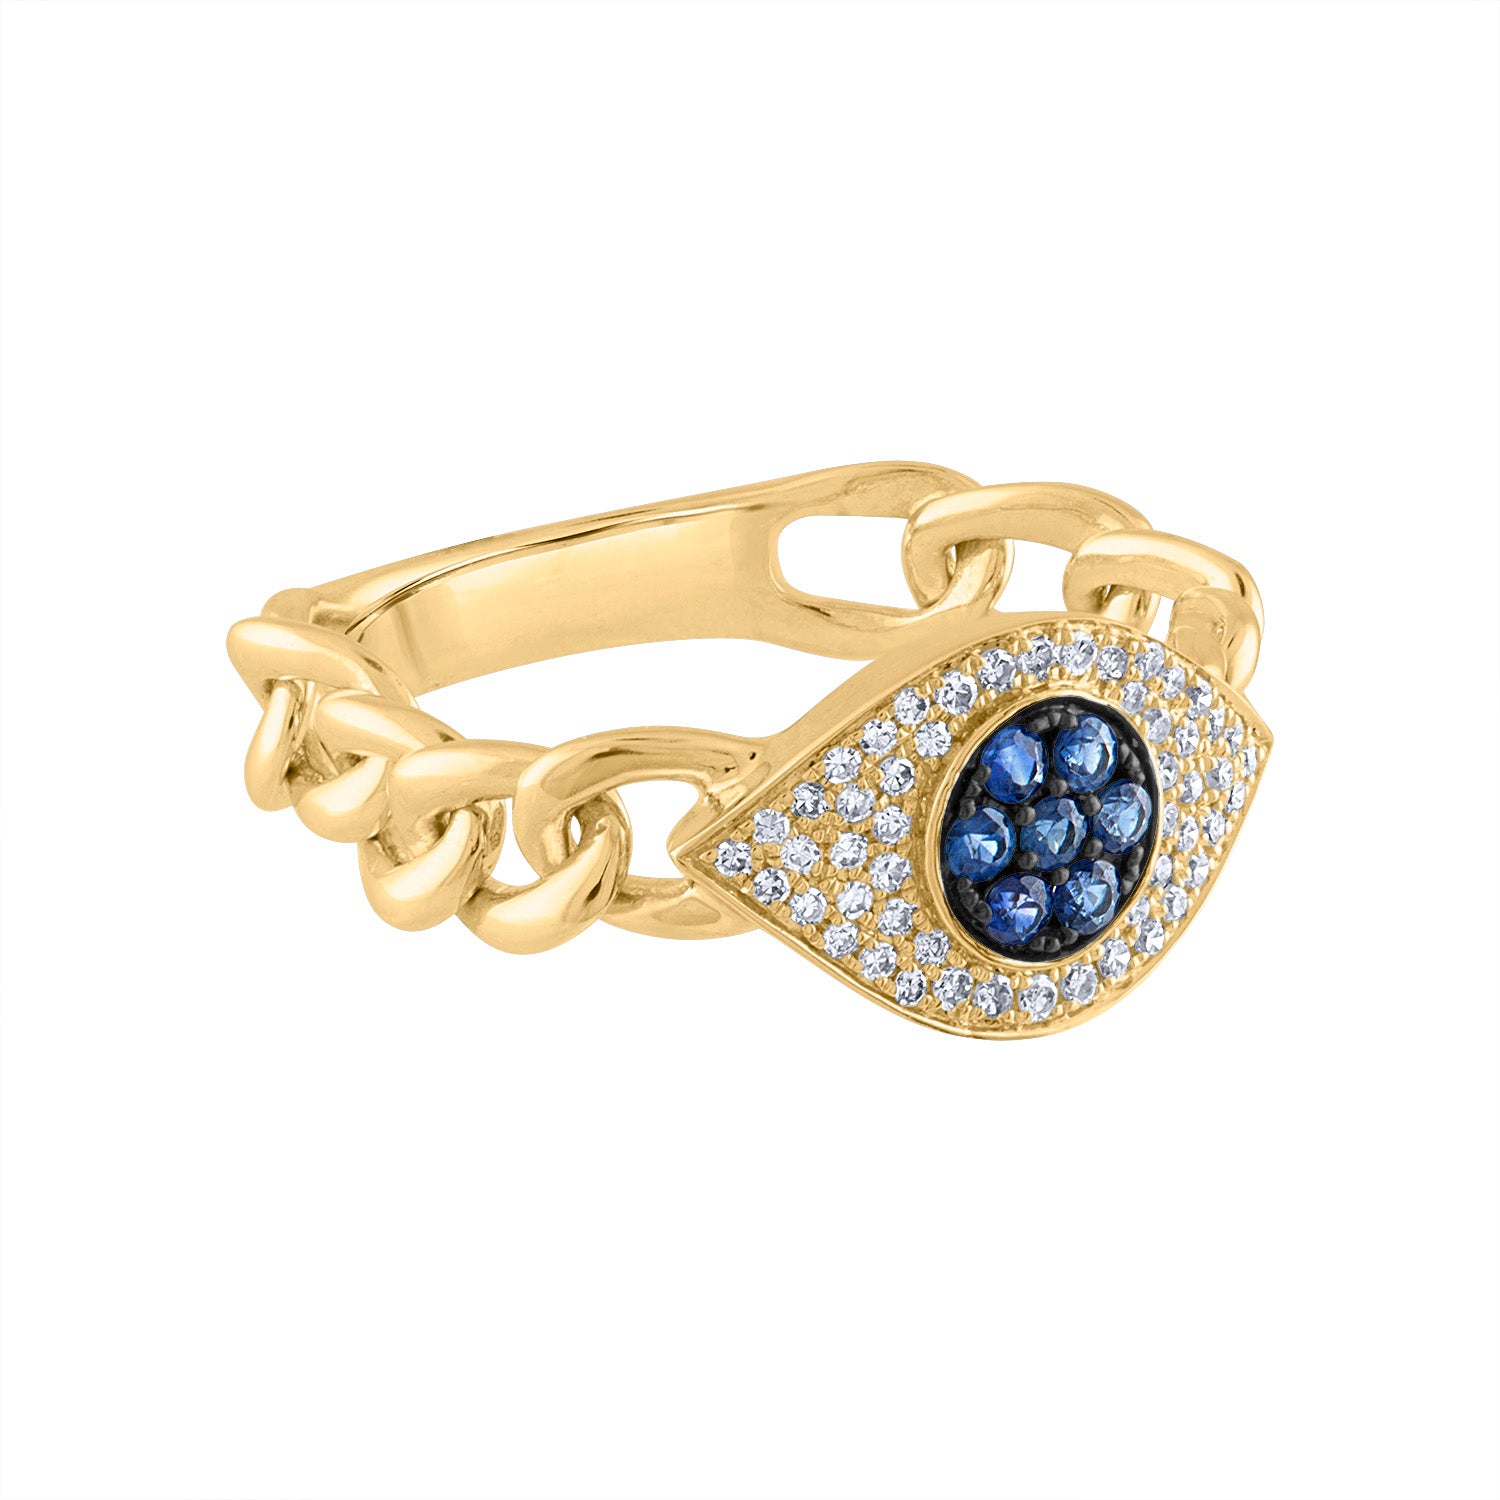 14KT GOLD DIAMOND AND BLUE SAPPHIRE EVIL EYE CHAIN LINK RING